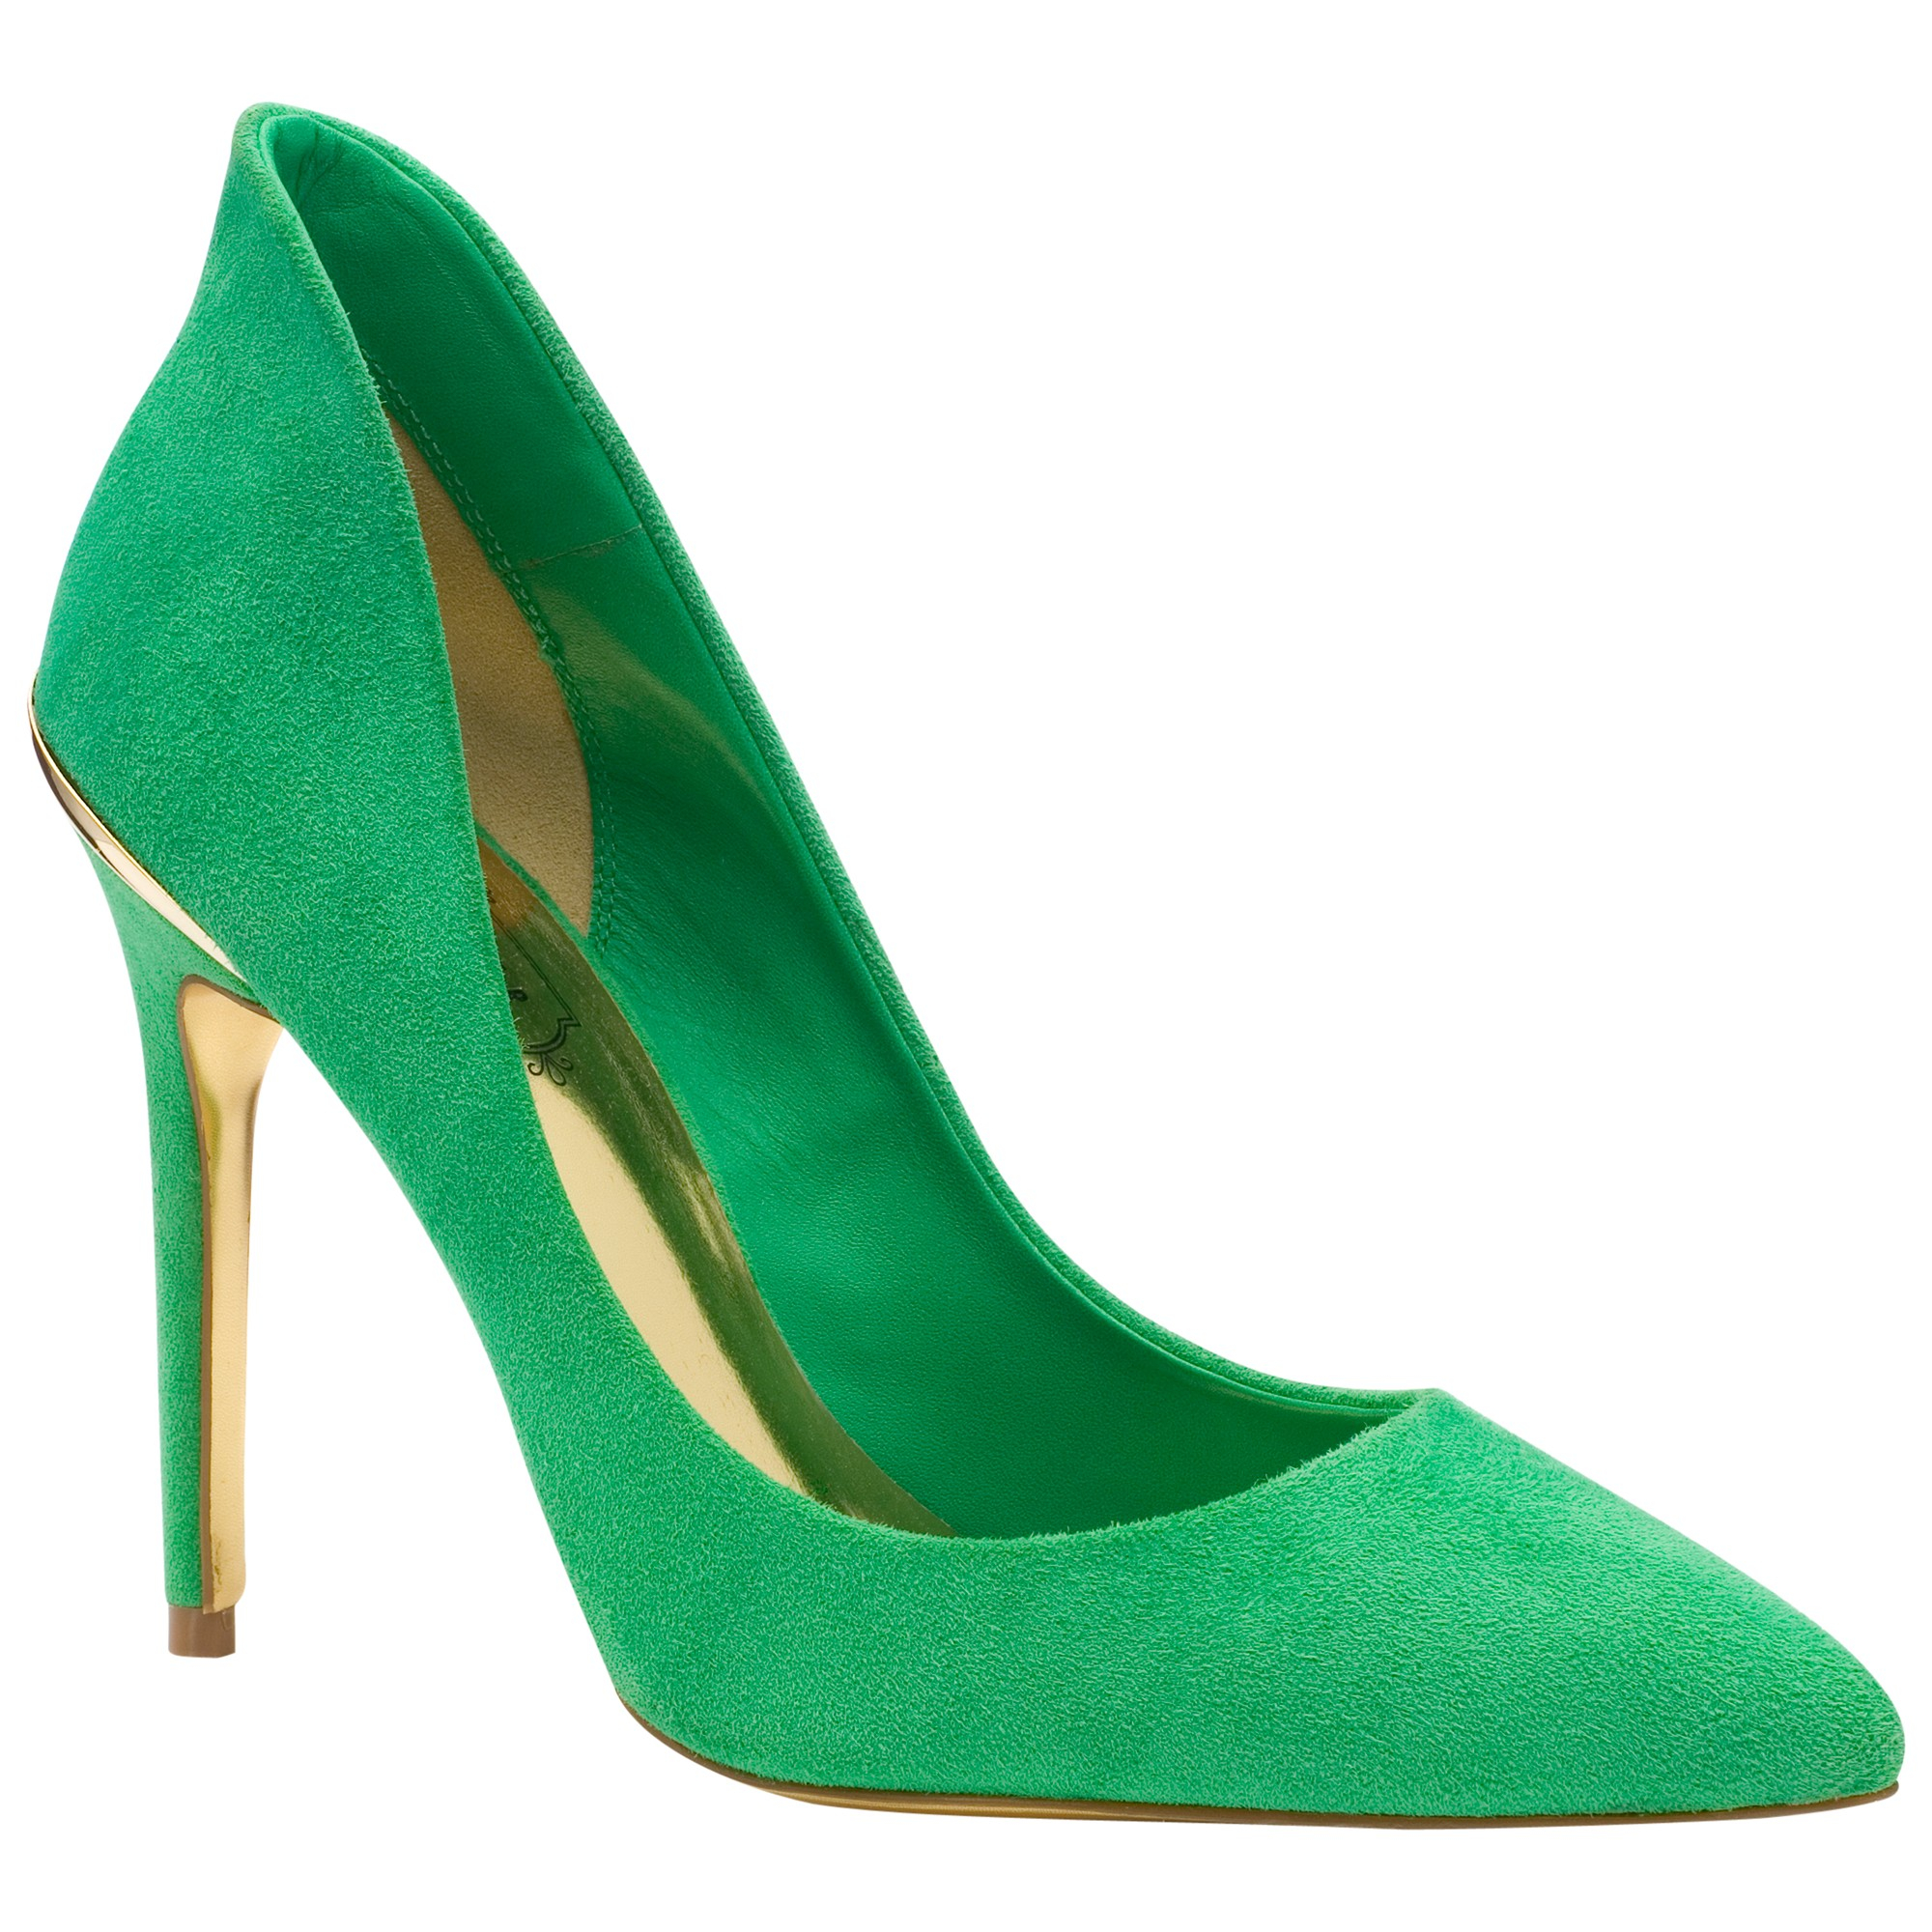 Ted Baker Savenniers Suede High Heeled Court Shoes in Green - Lyst